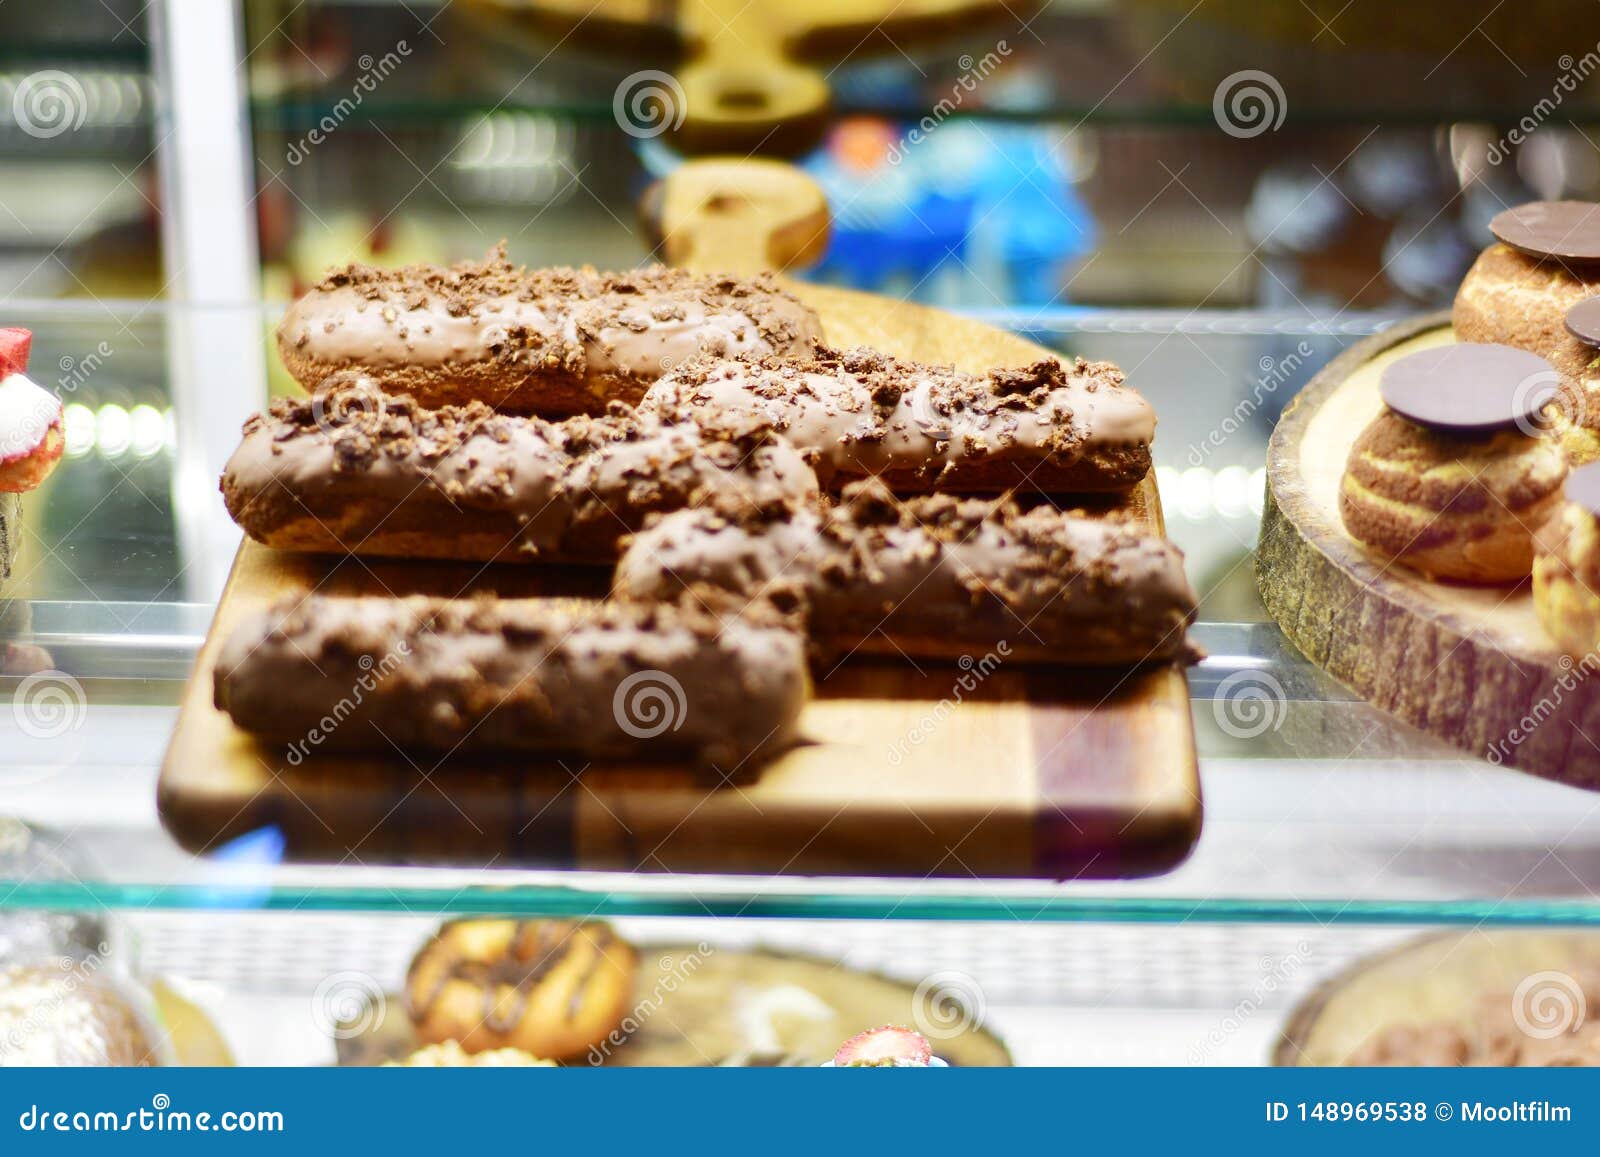 sweet desserts and cakes in a vitrine of a cafe